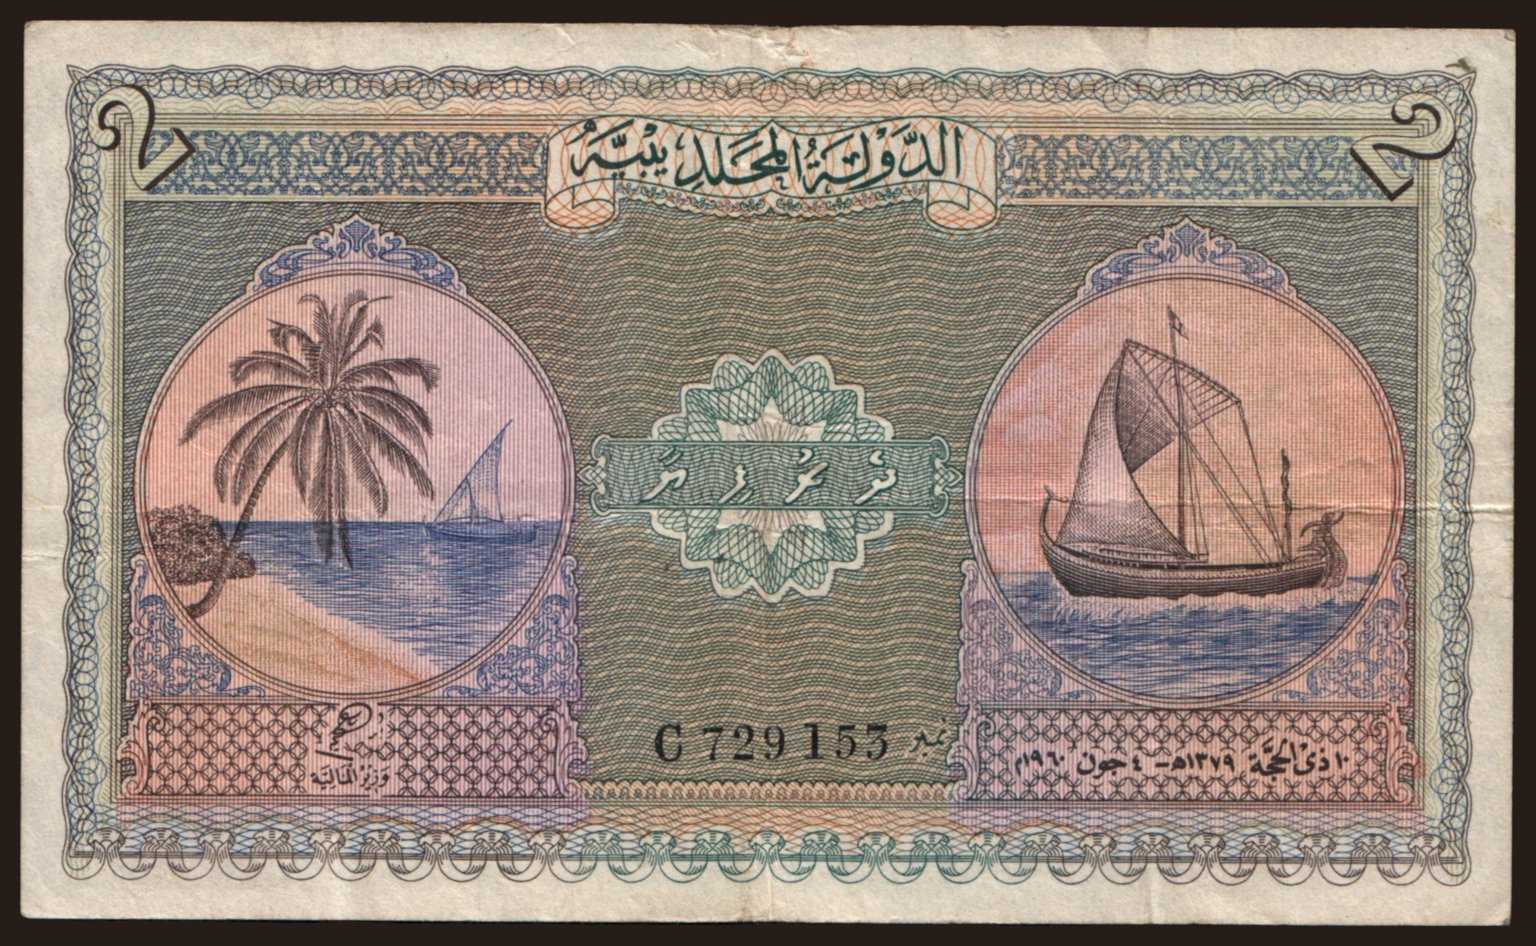 2 rupees, 1960